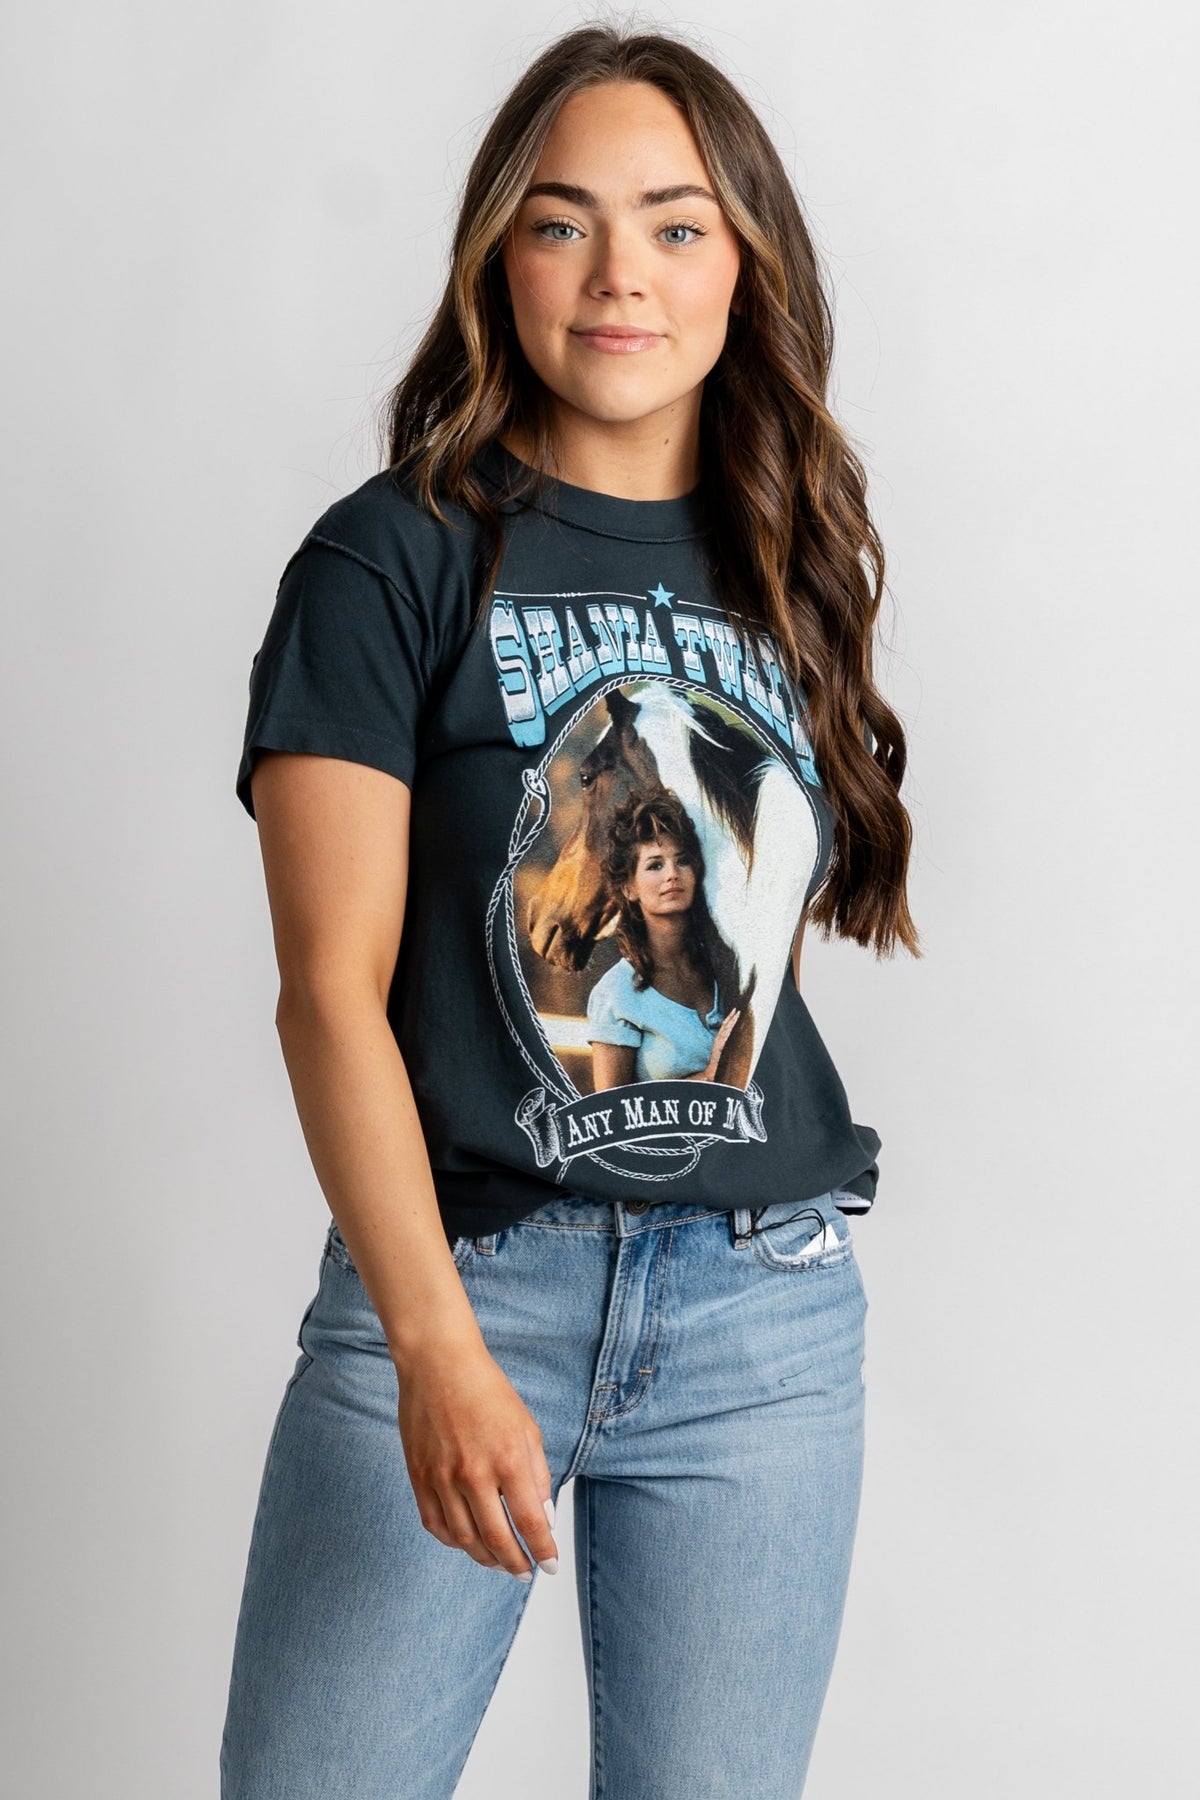 DayDreamer Shania Twain any man of mine tee vintage black - Trendy Band T-Shirts and Sweatshirts at Lush Fashion Lounge Boutique in Oklahoma City